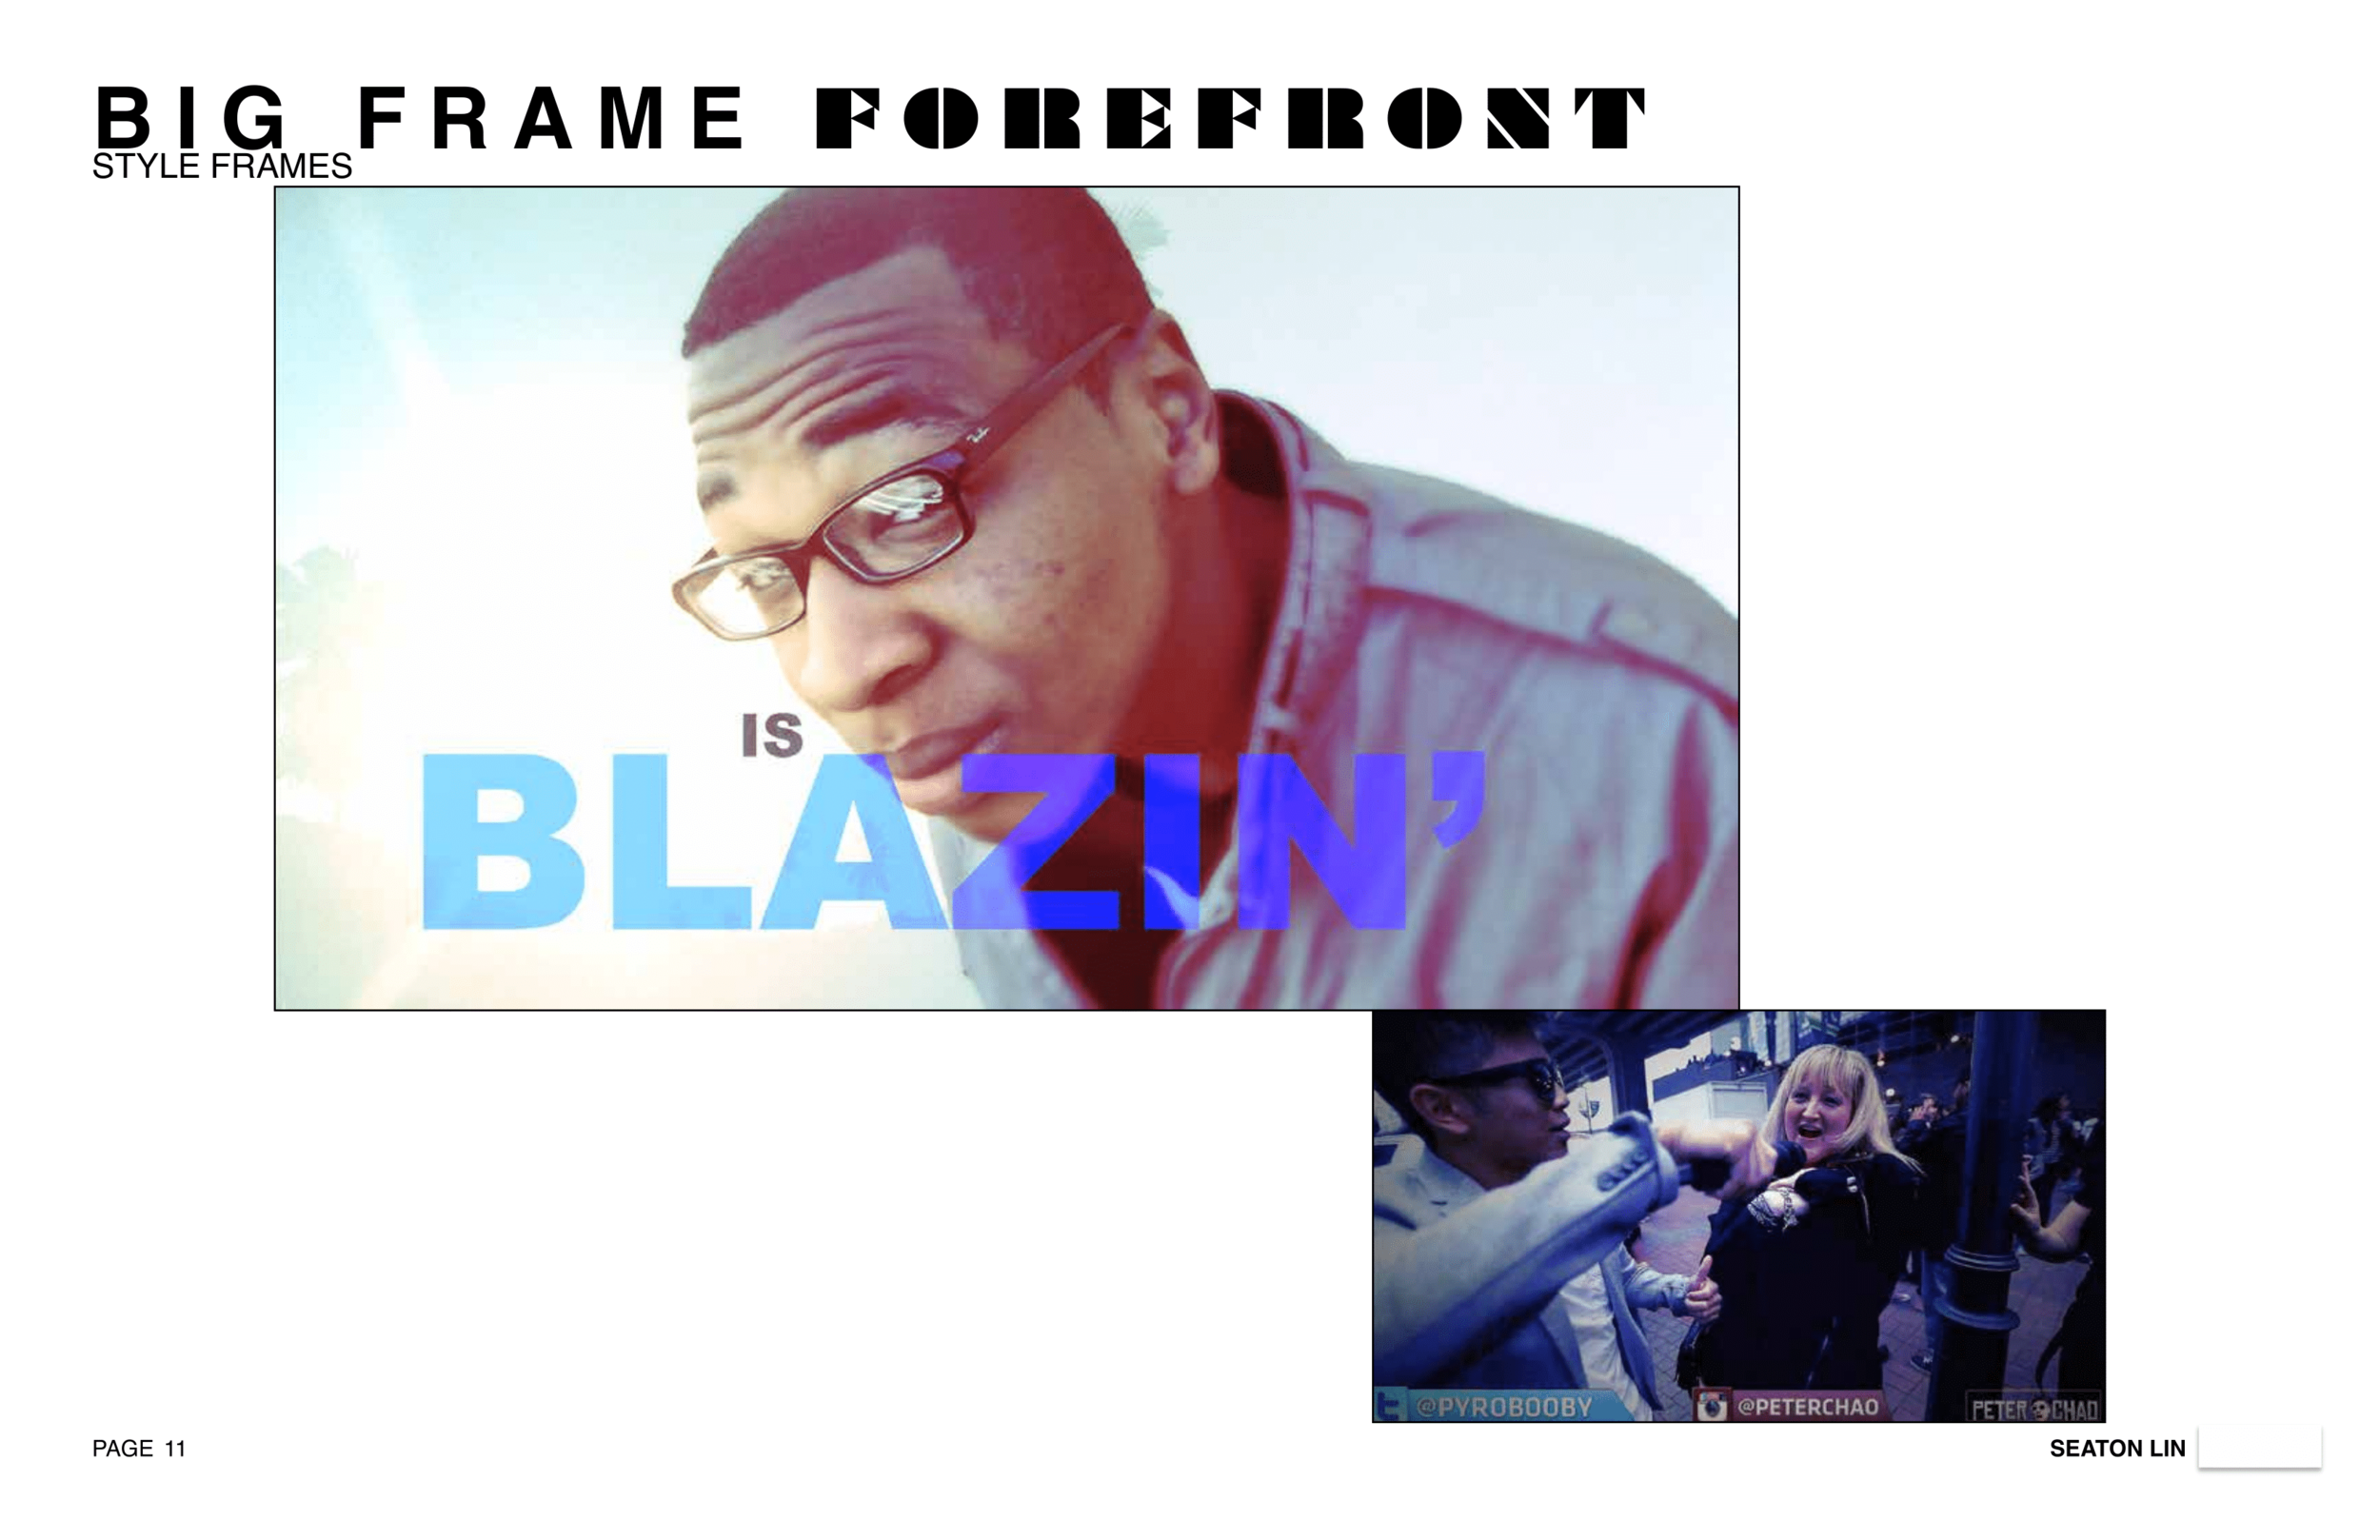 BigFrame_ForeFront_Treatment_SeatonLin-11.png